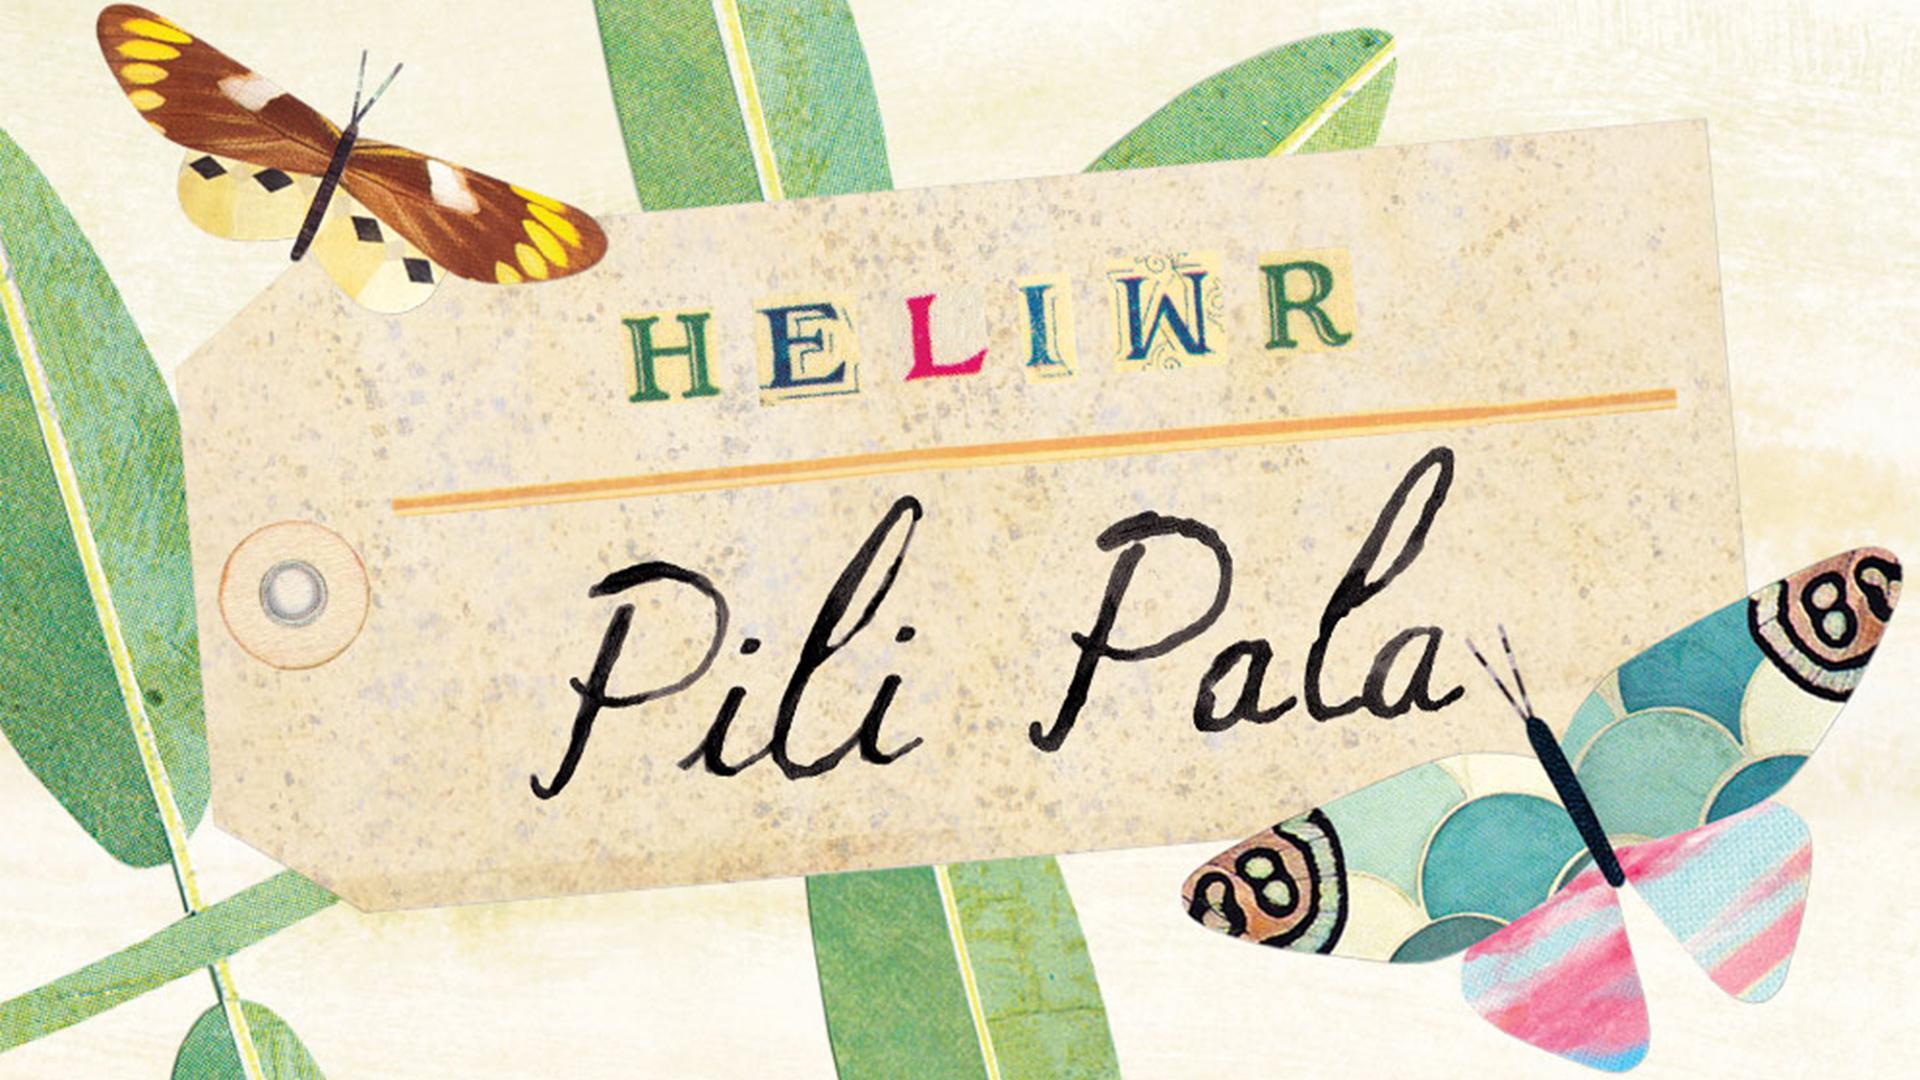 Heliwr Pili Pala on some aged paper with bugs in background